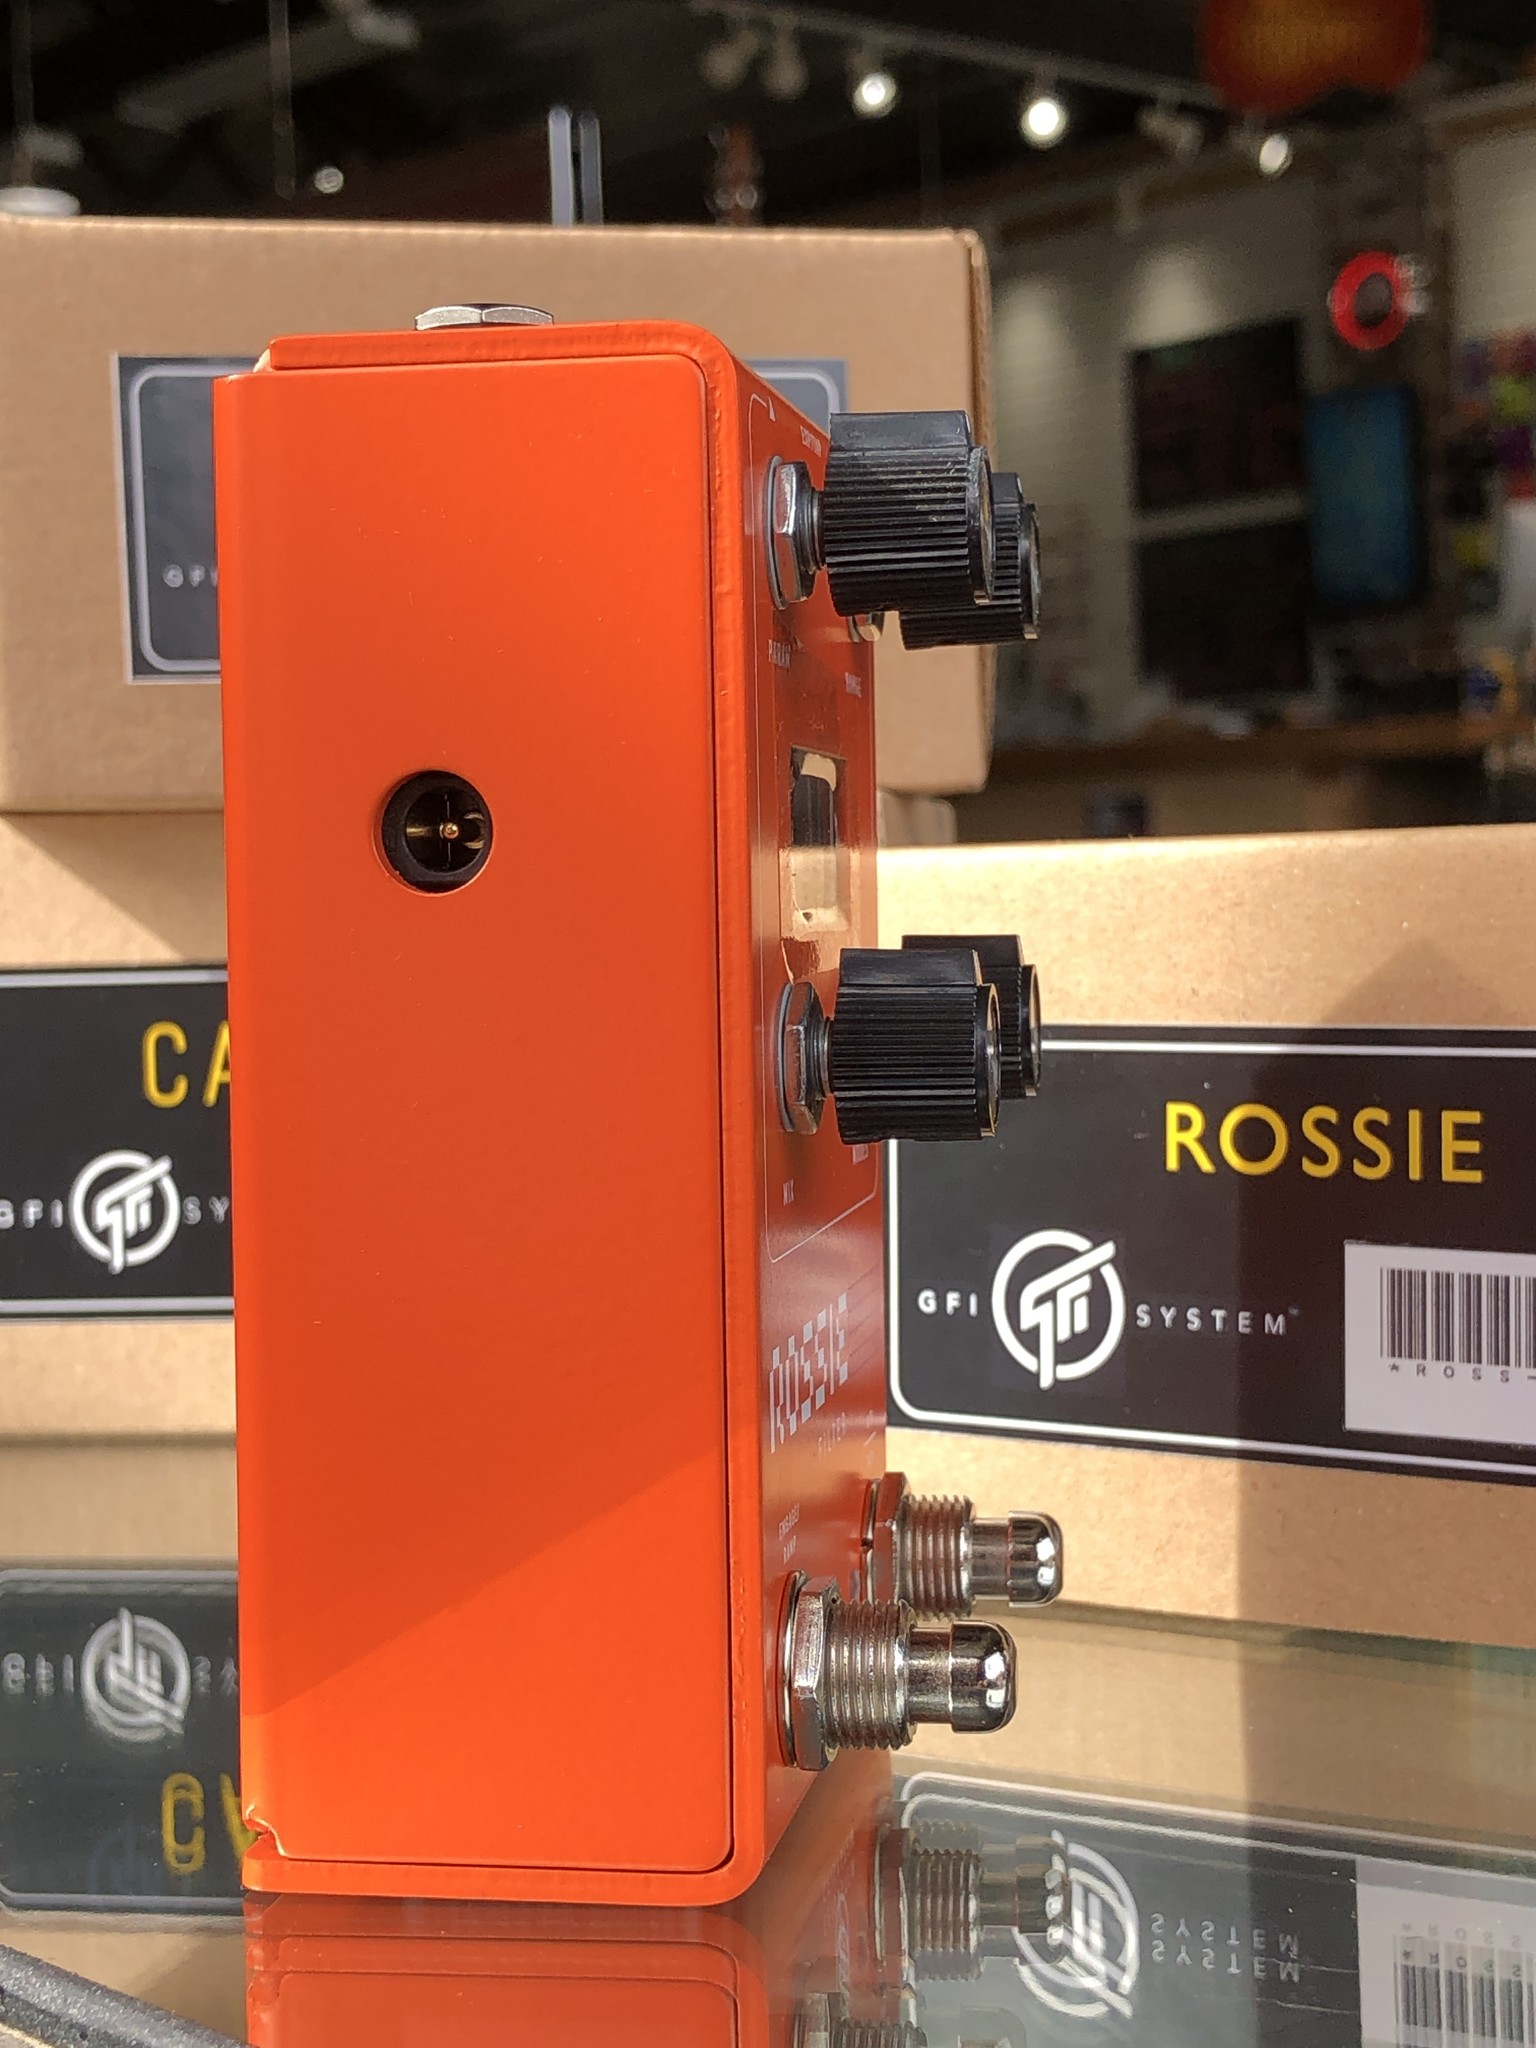 GFI System Rossie Filter-4